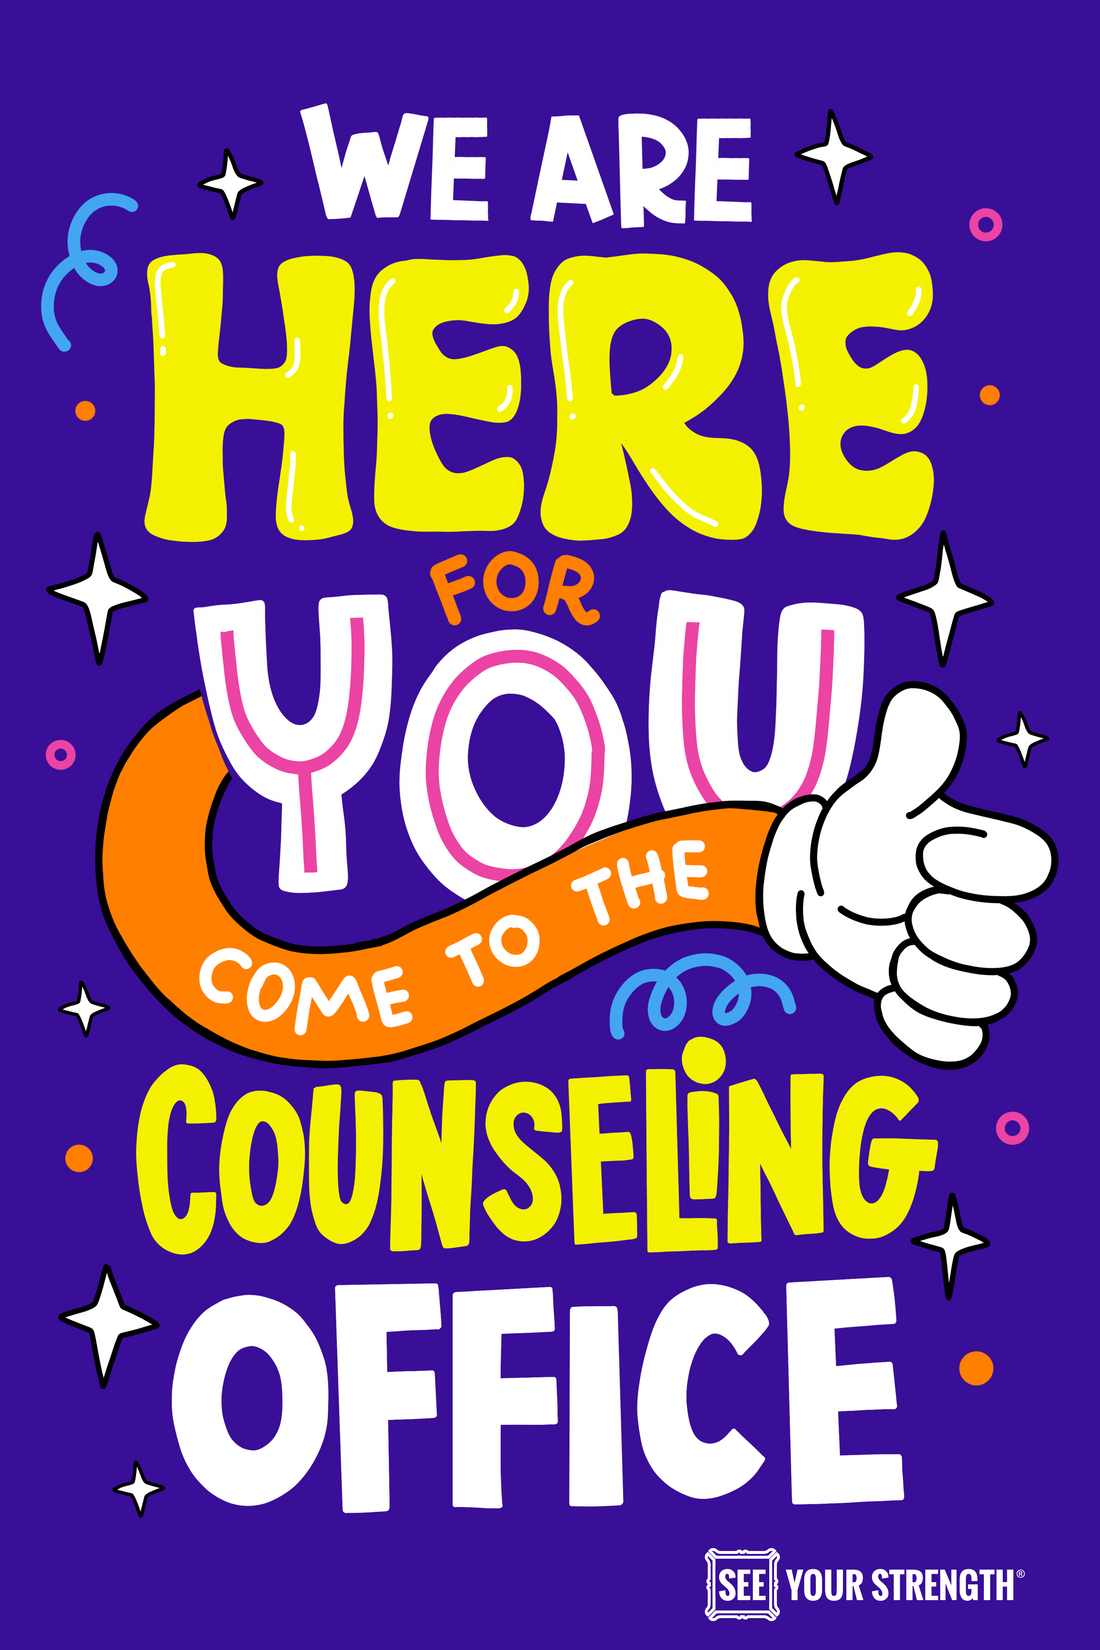 We are here for you Come see us in the counseling office